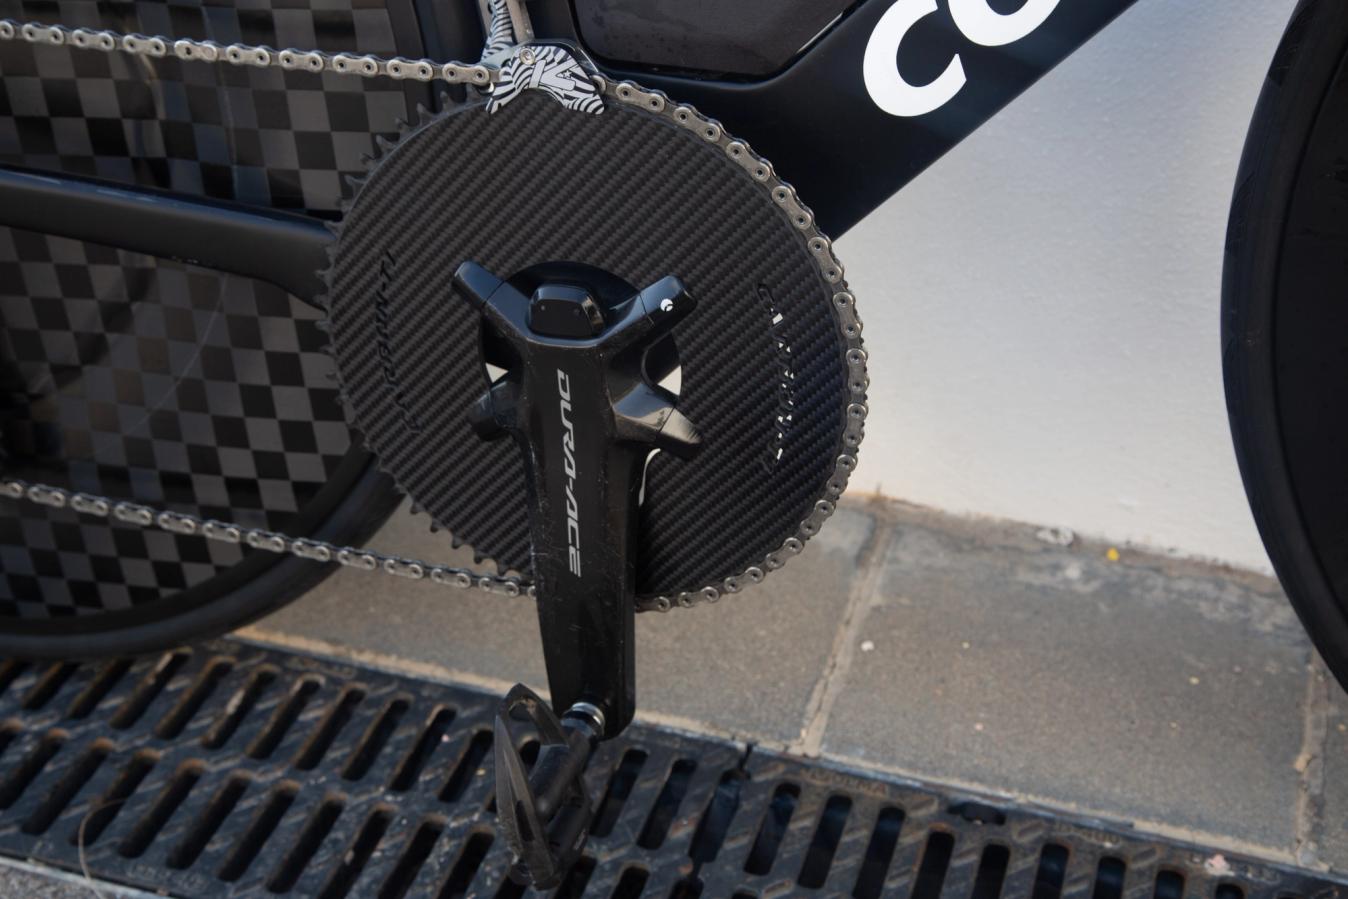 The huge Carbon-Ti chainring is paired with Shimano Dura-Ace cranks